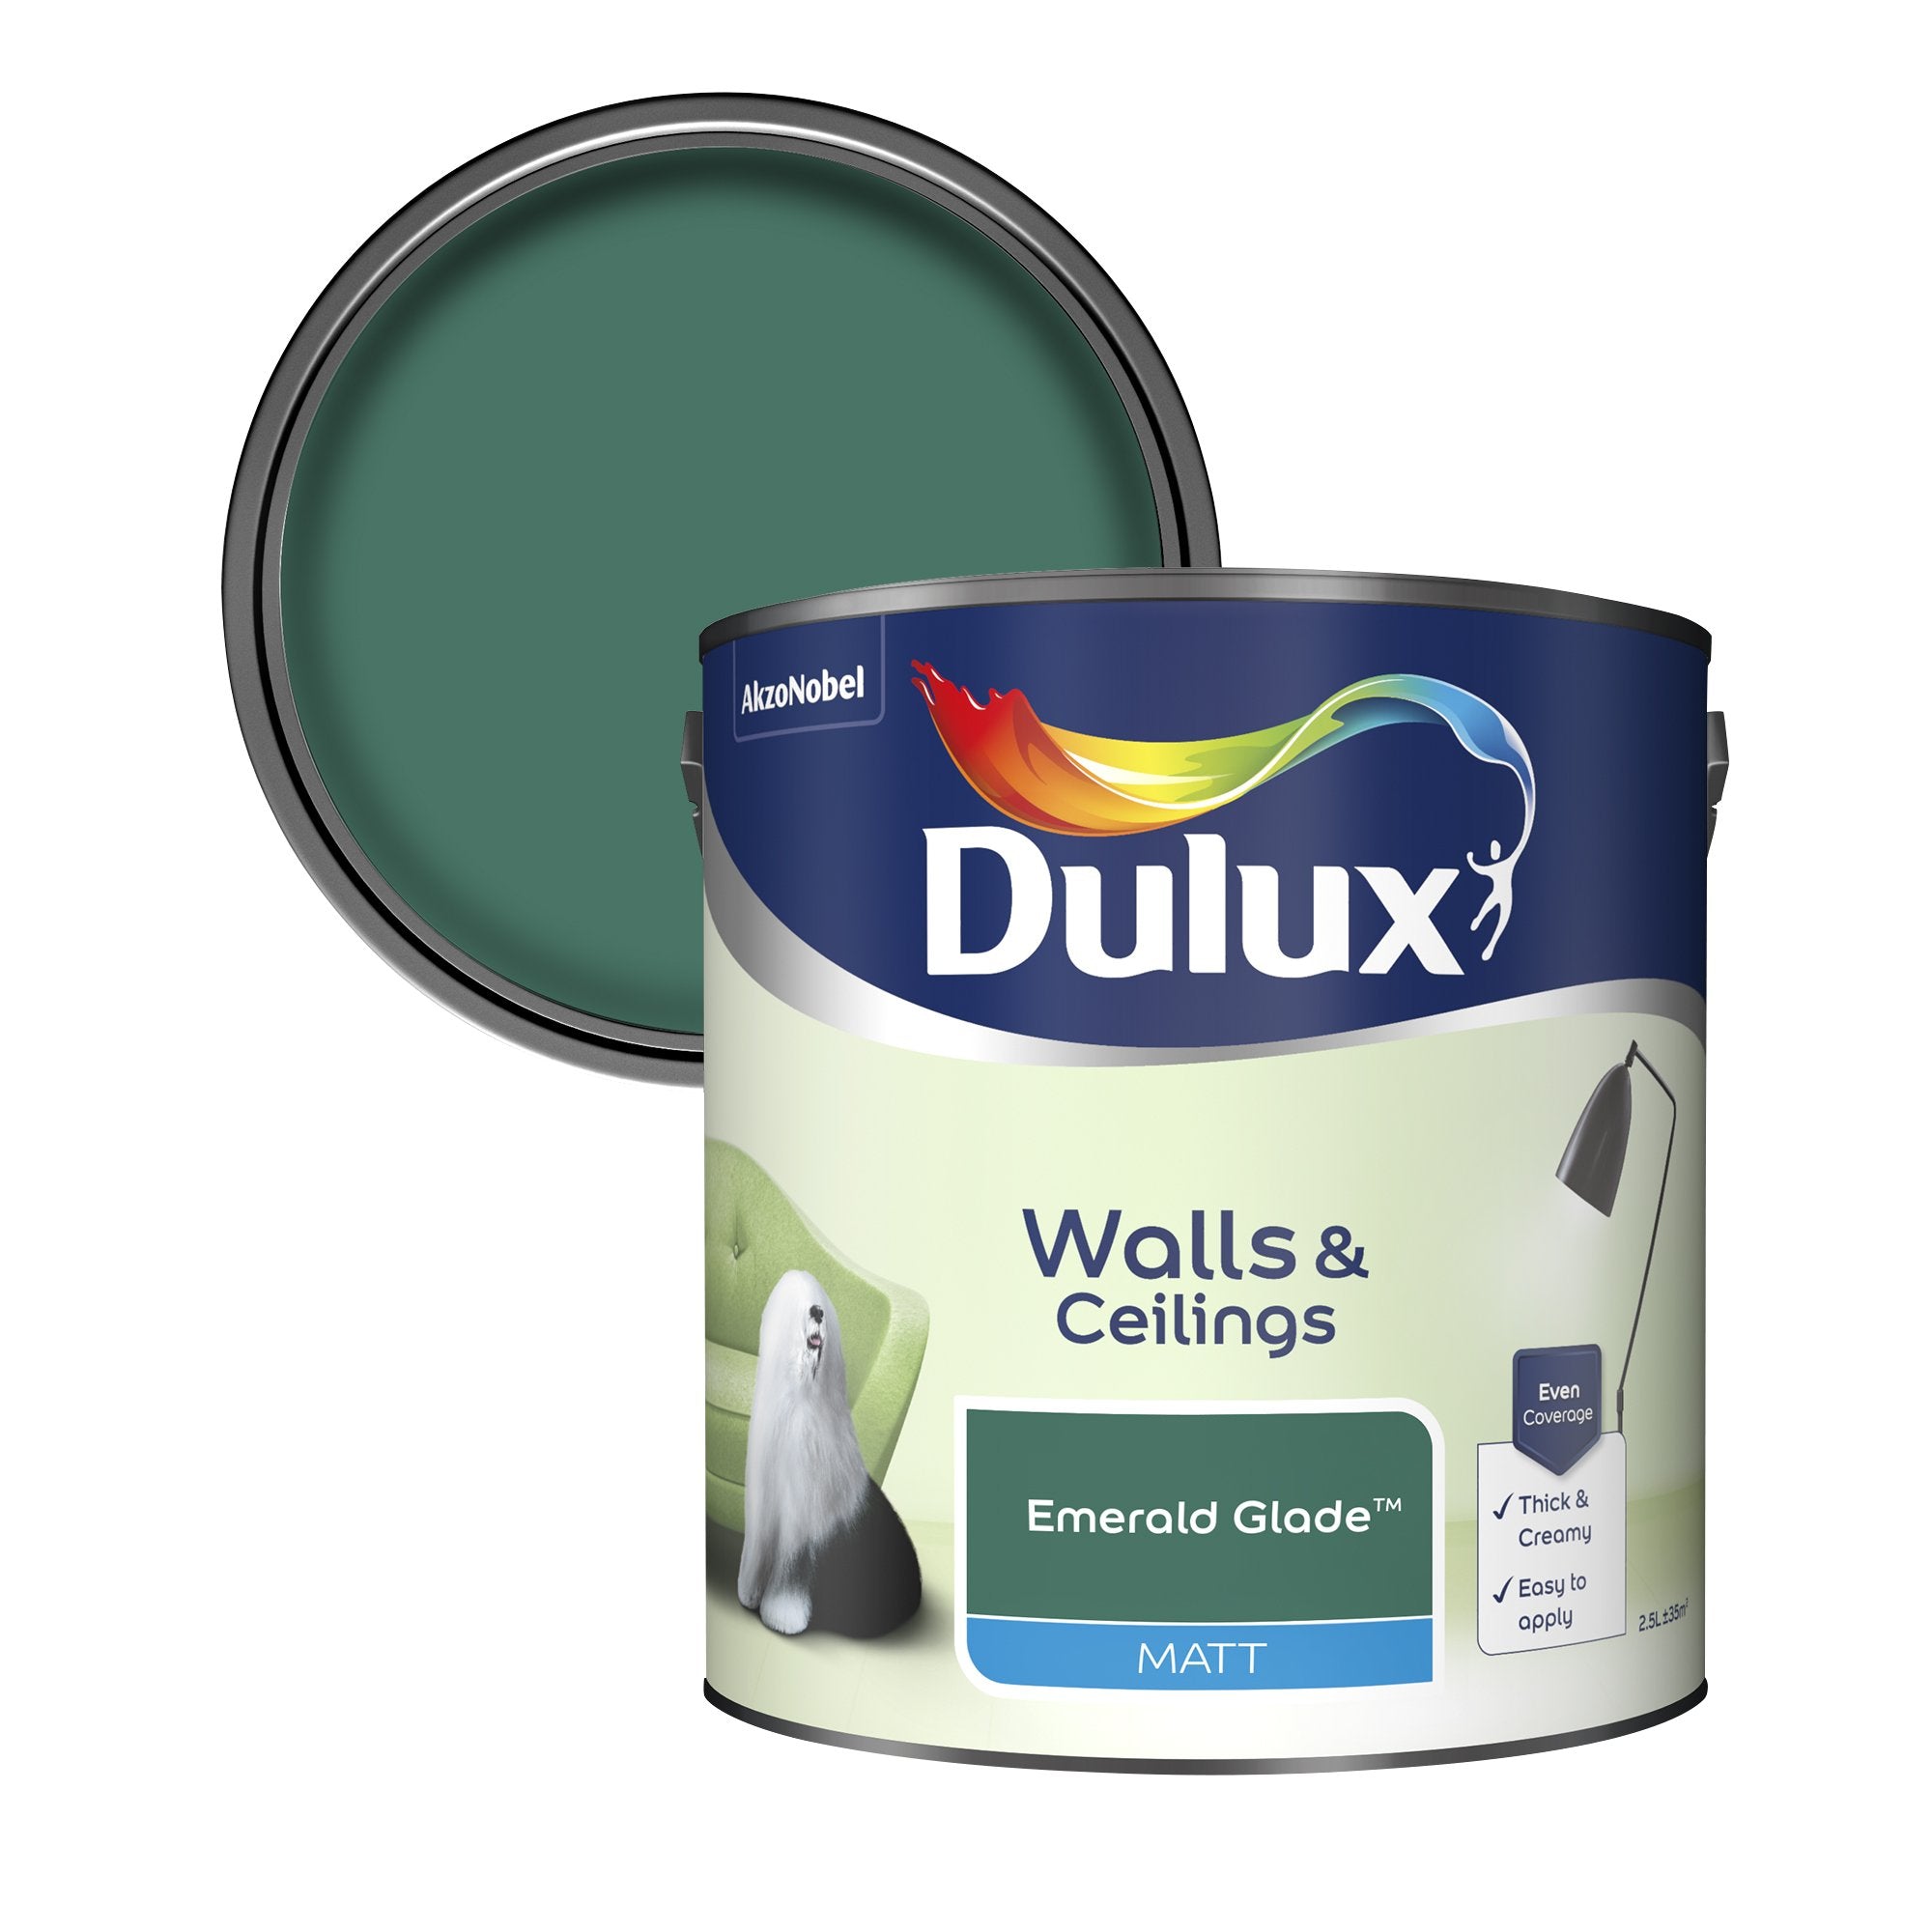 Dulux-Matt-Emulsion-Paint-For-Walls-And-Ceilings-Emerald-Glade-2.5L